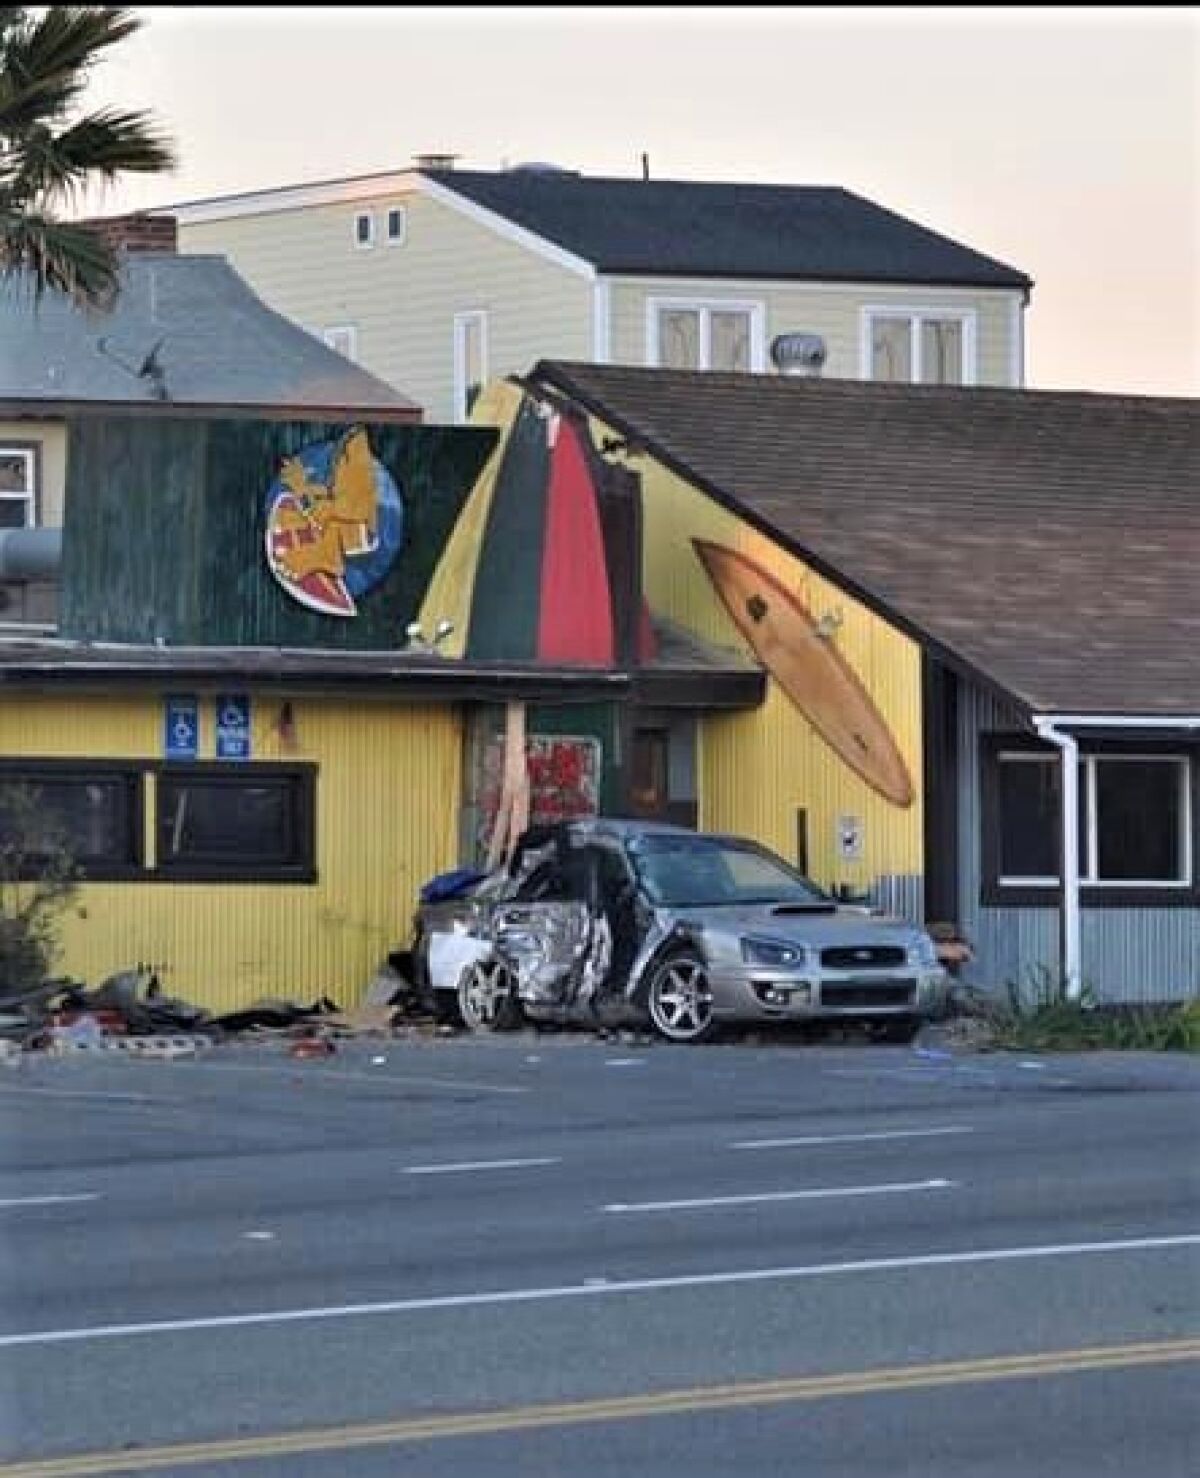 A photo taken Feb. 6, 2022 shows a vehicle that crashed into a Taco Surf restaurant on PCH in Surfside.